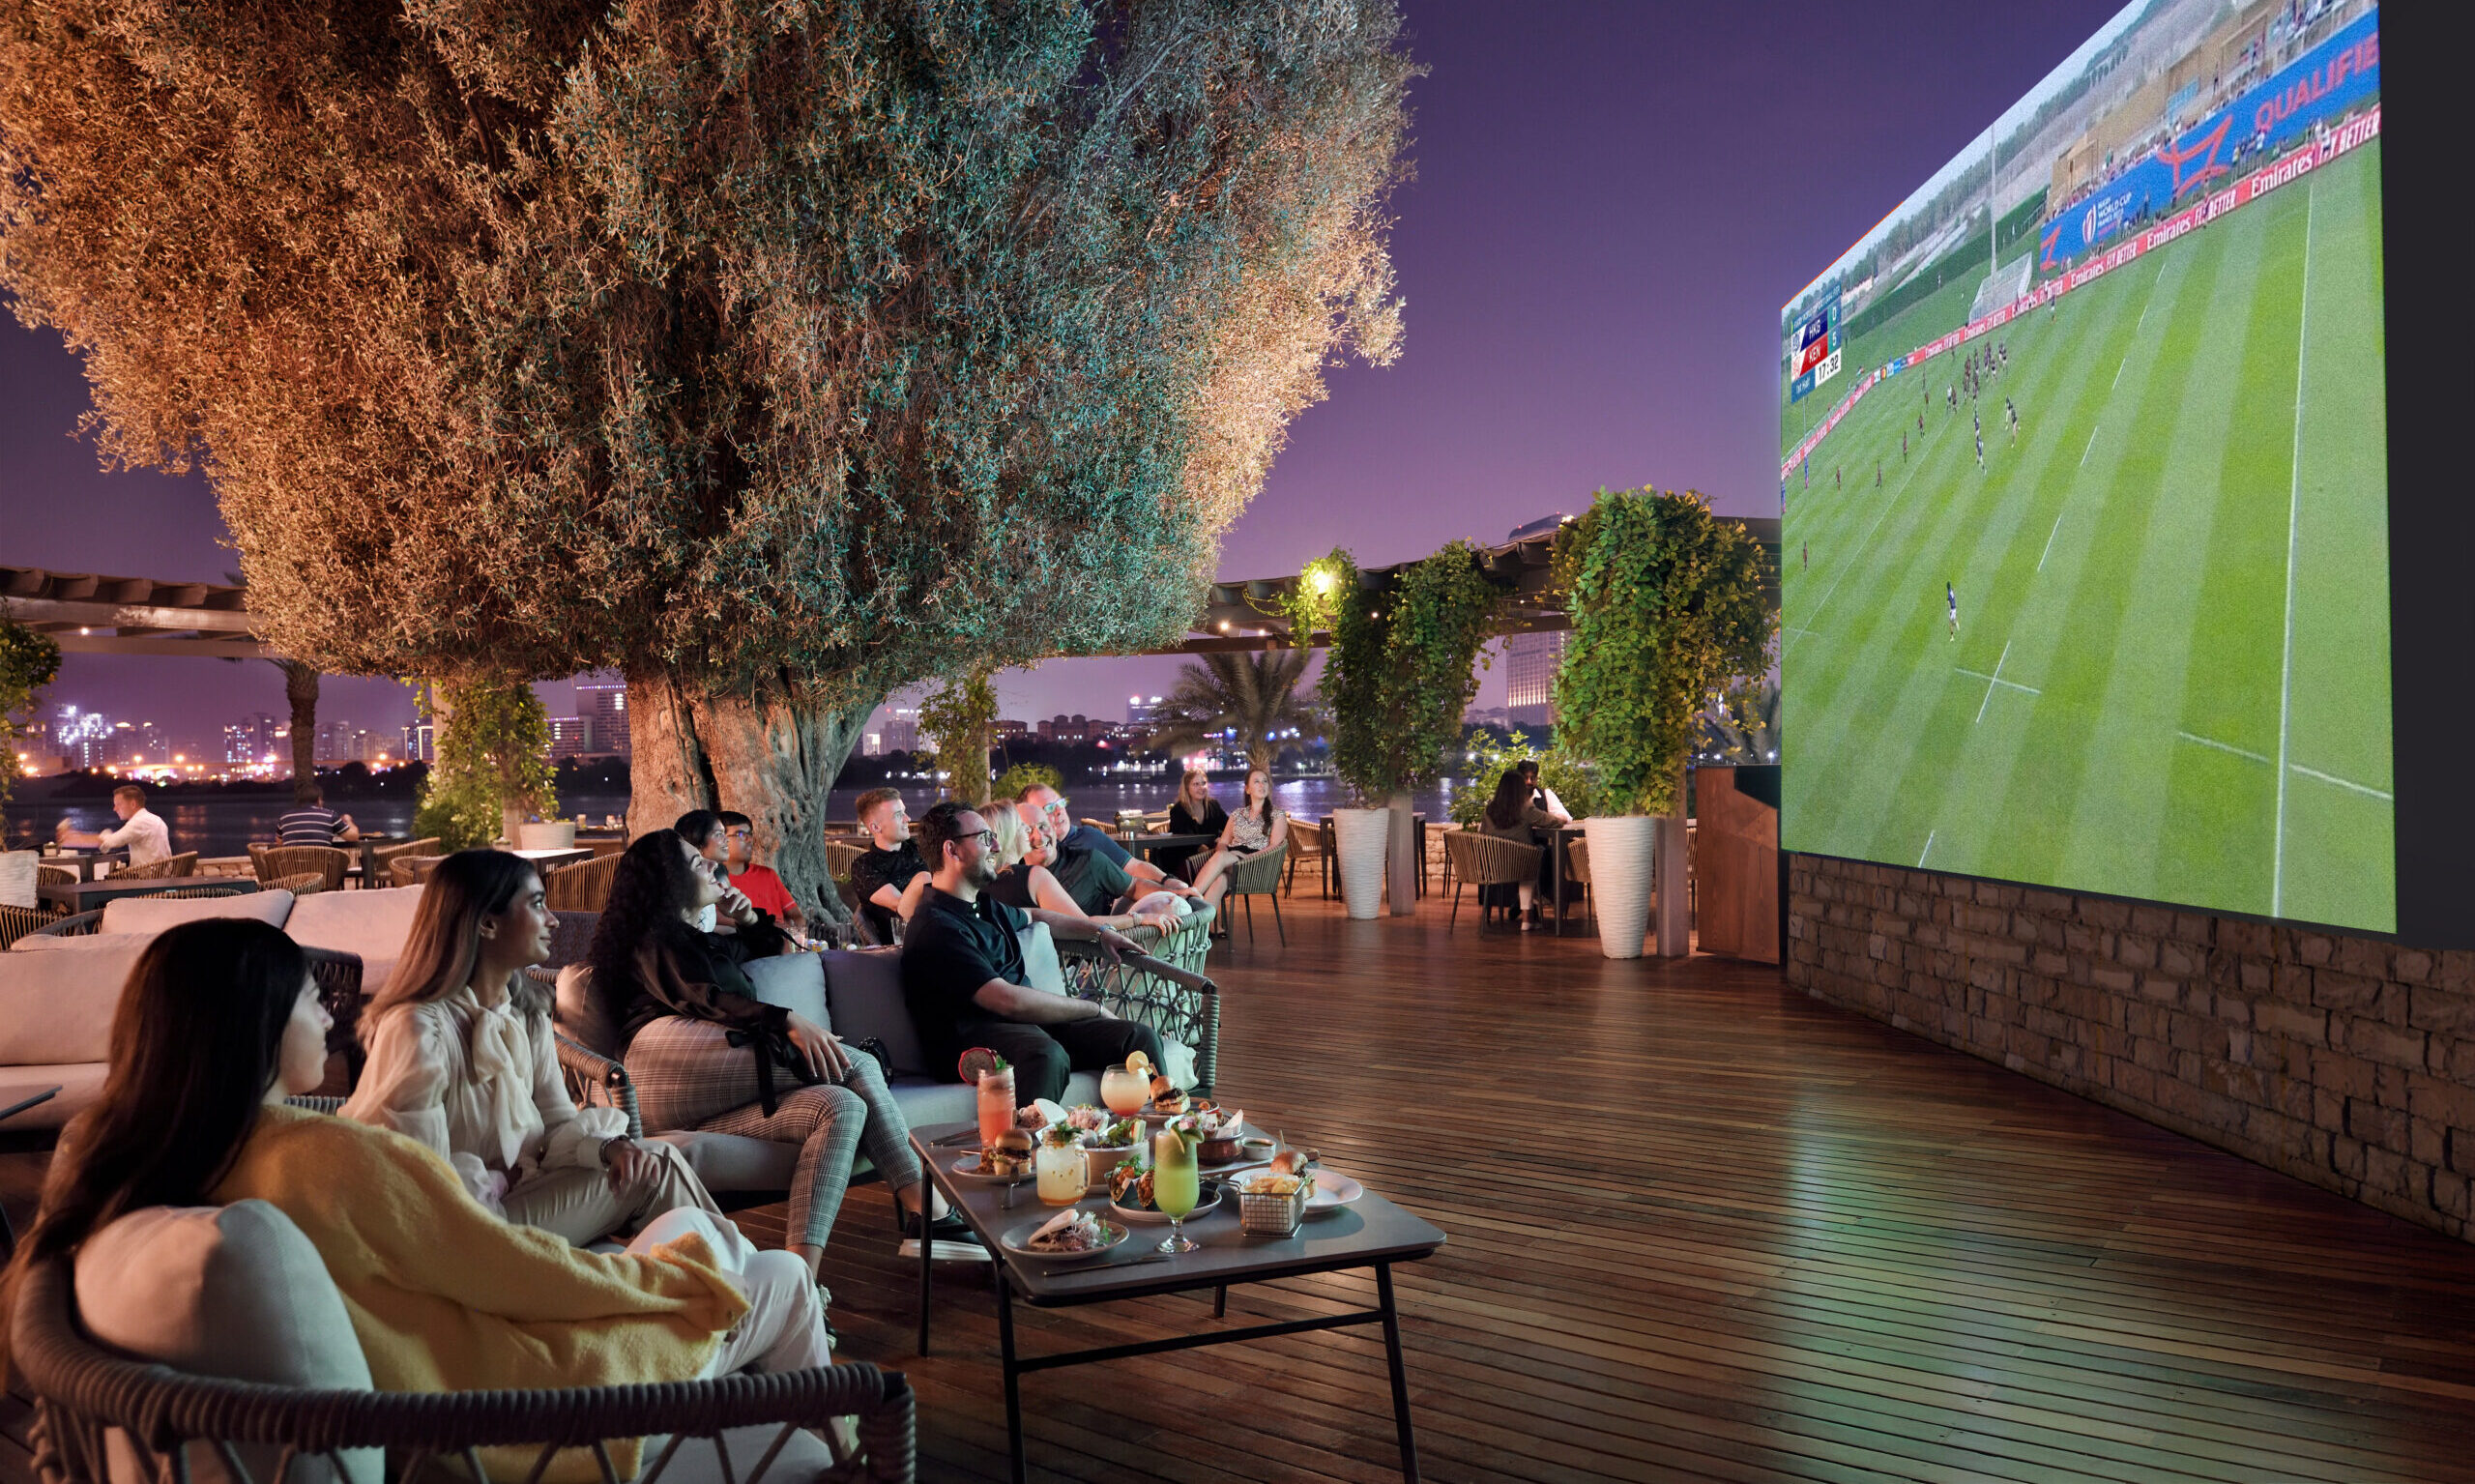  Ultimate Fanzone: Premier League, Rugby World Cup, and Cricket World Cup Action at Lakeview and QD’s